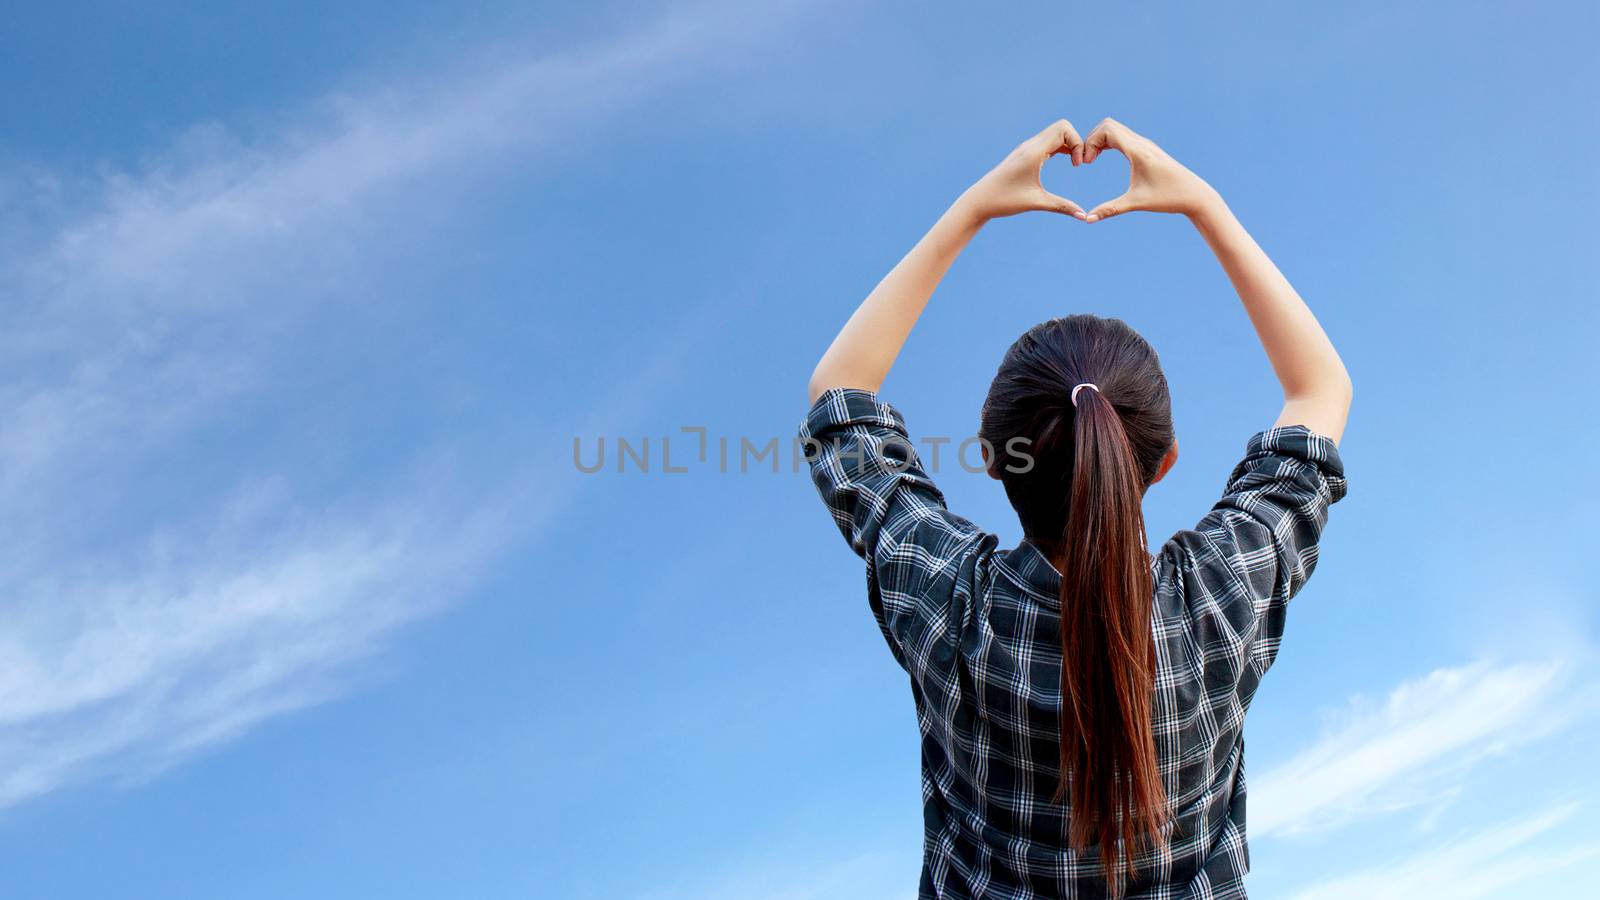 woman raise her hands to make heart shape in the air with blue sky at background by asiandelight